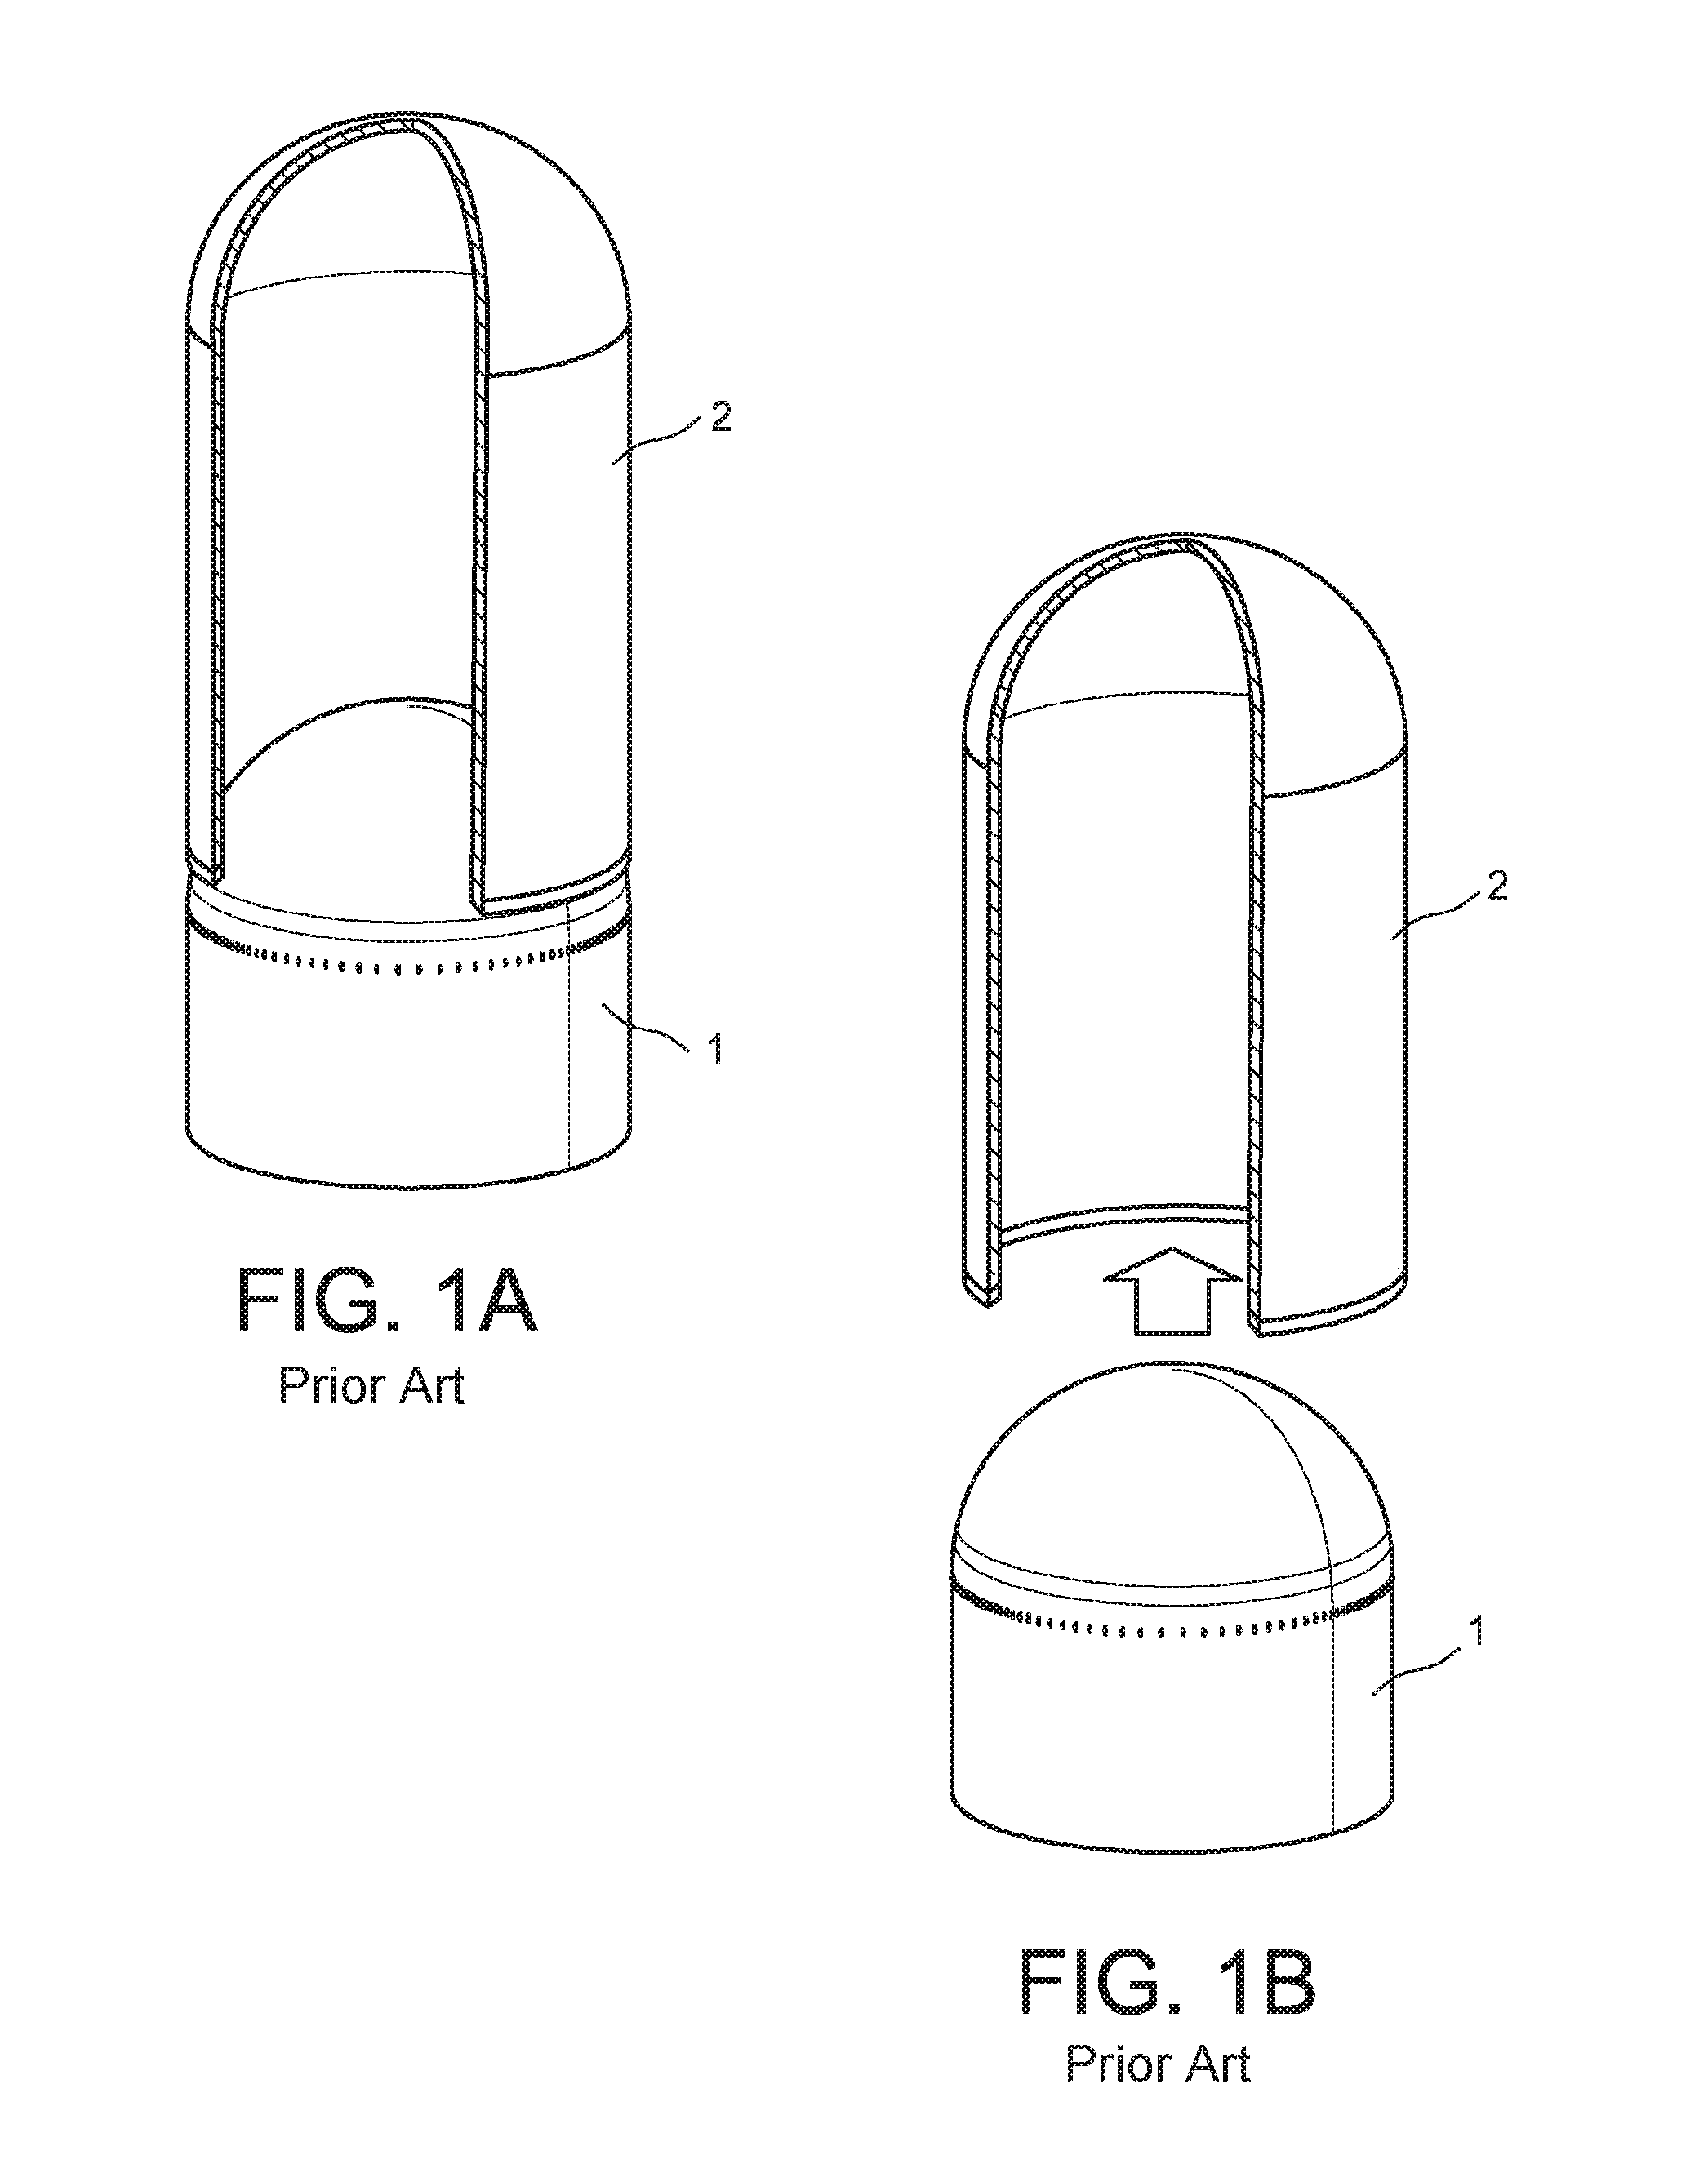 Method and device for connecting and separating two elements, with connecting plates